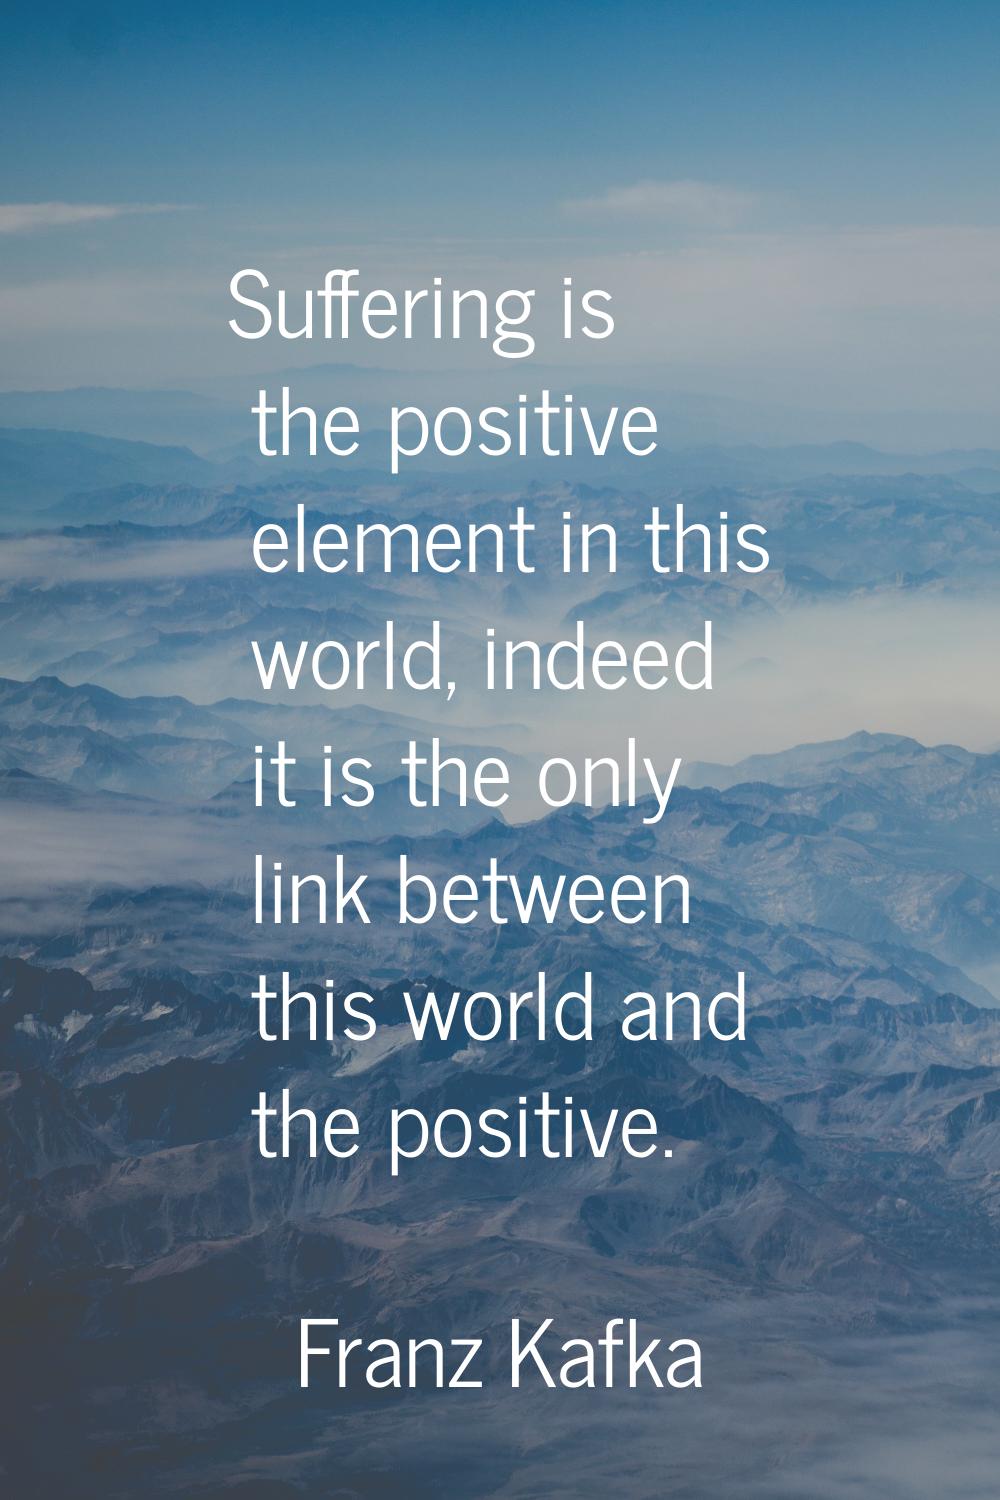 Suffering is the positive element in this world, indeed it is the only link between this world and 